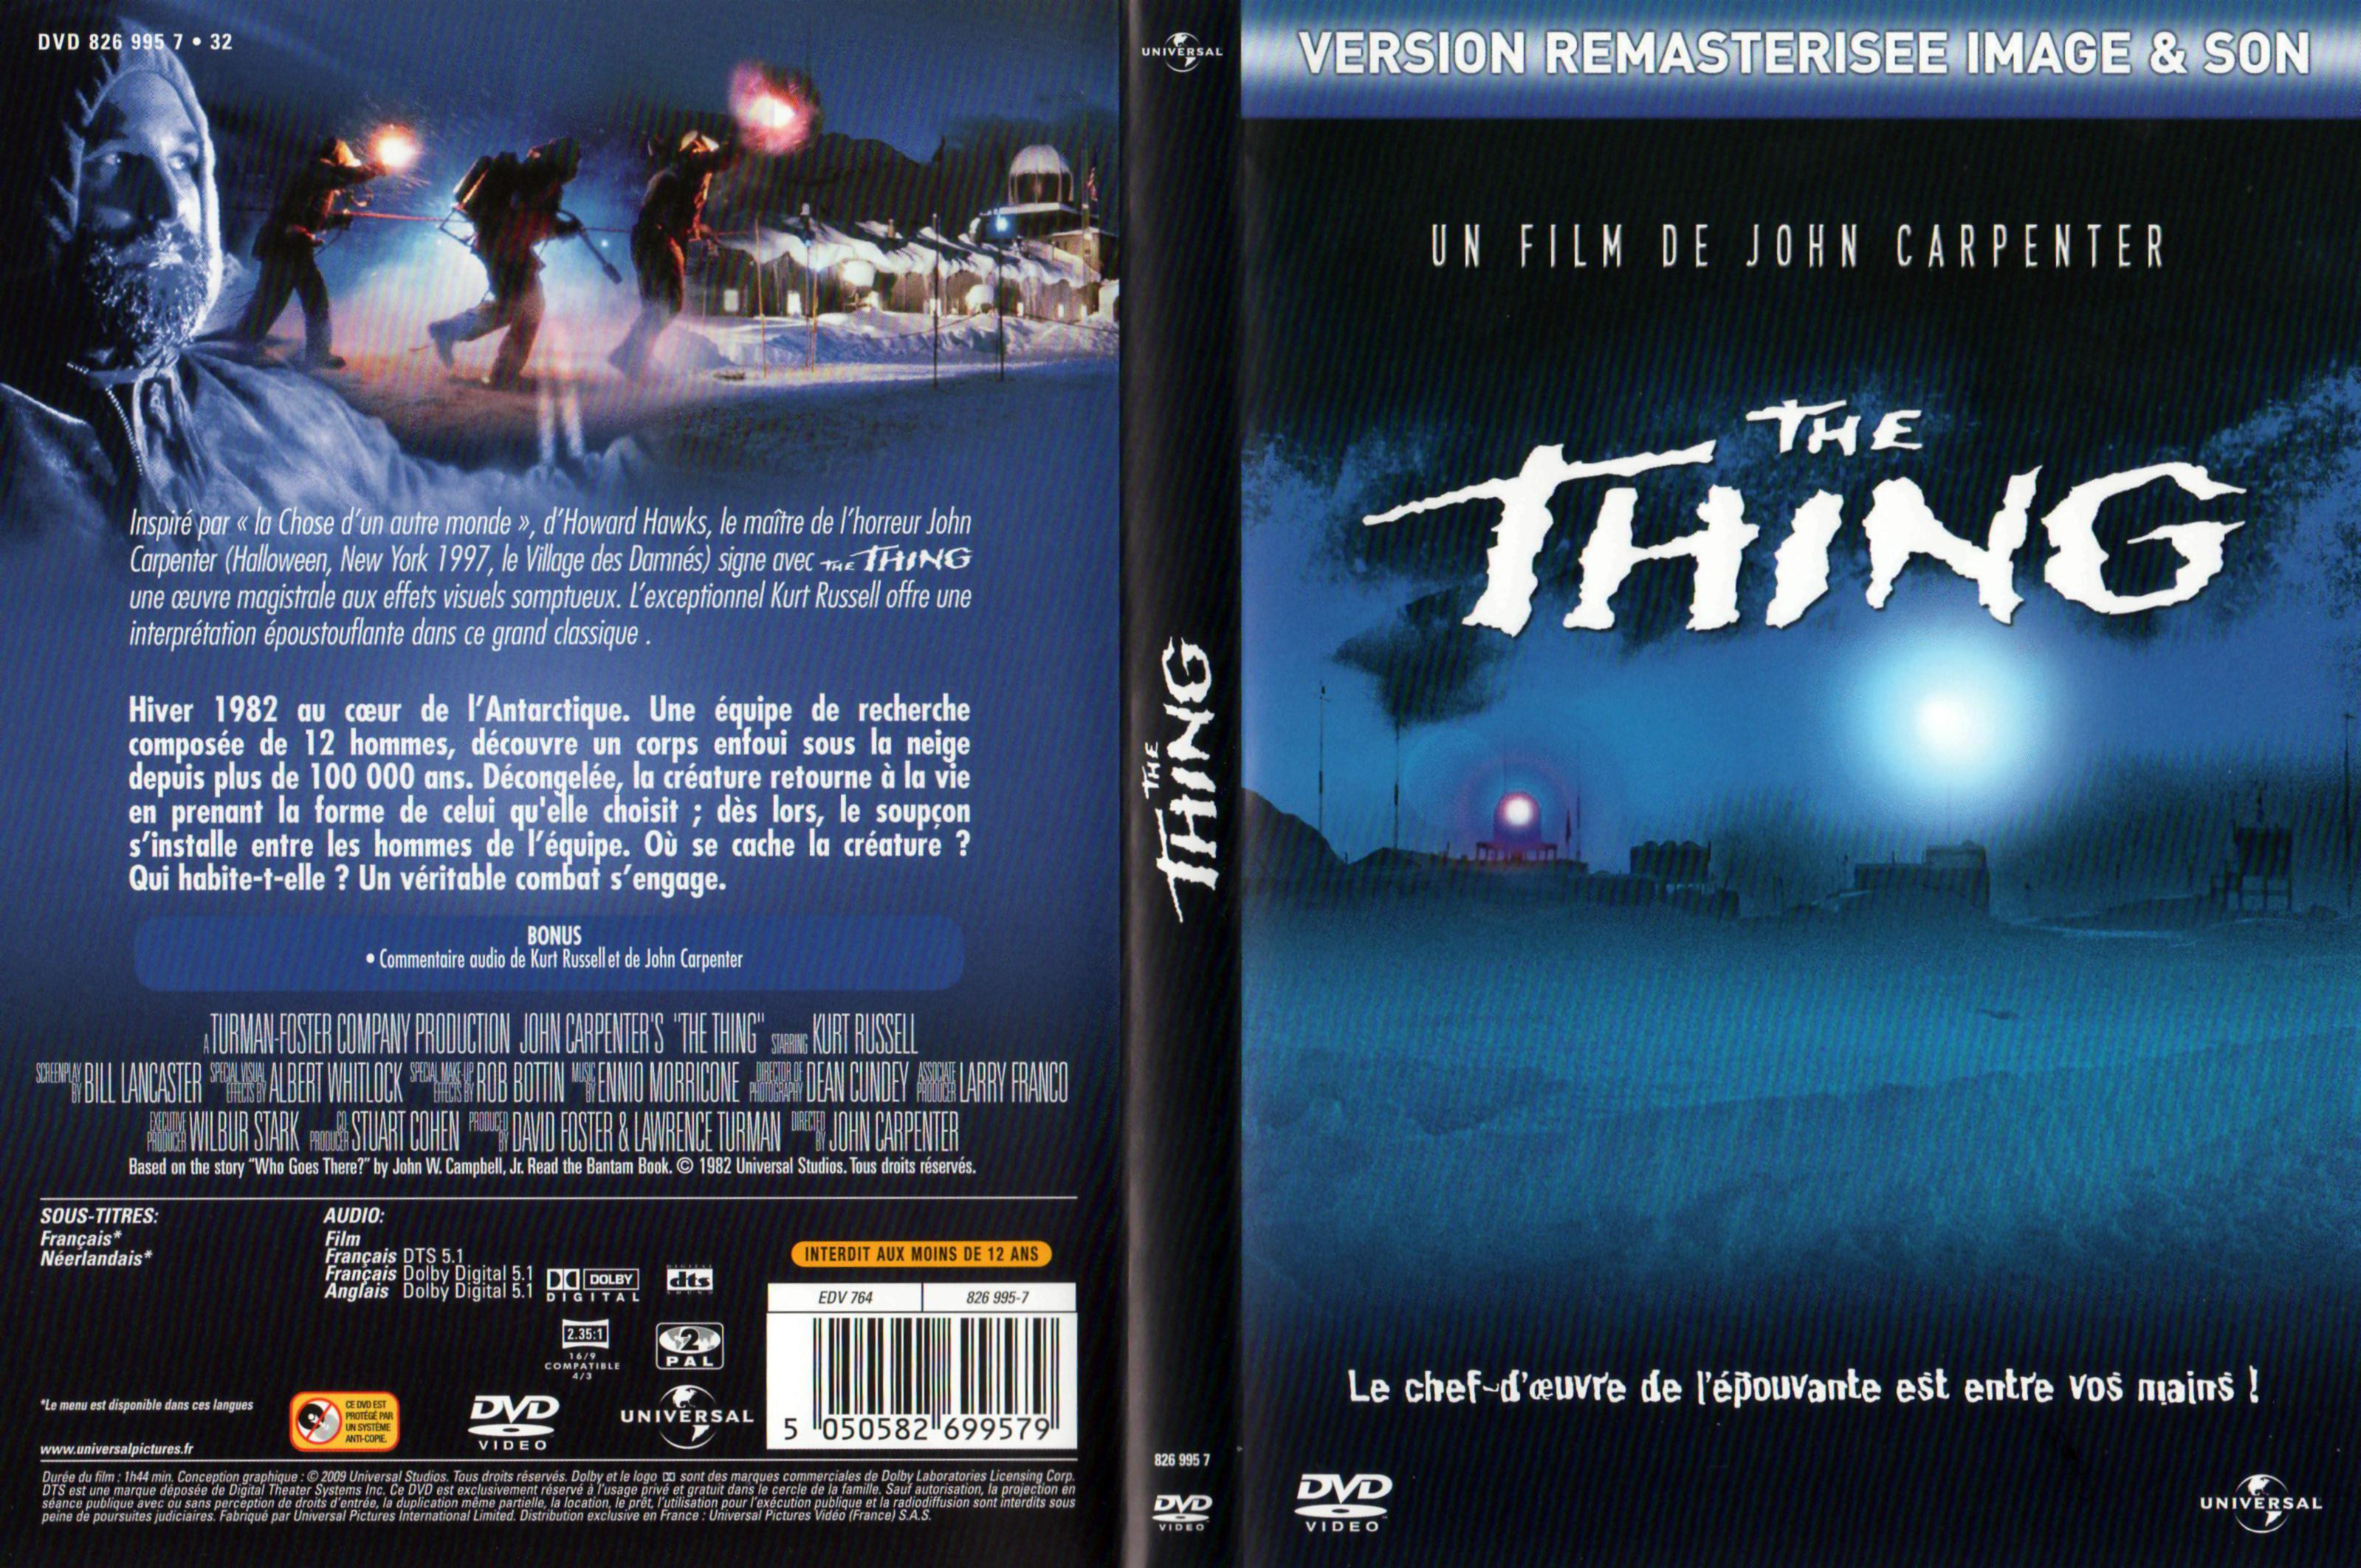 Jaquette DVD The thing v5